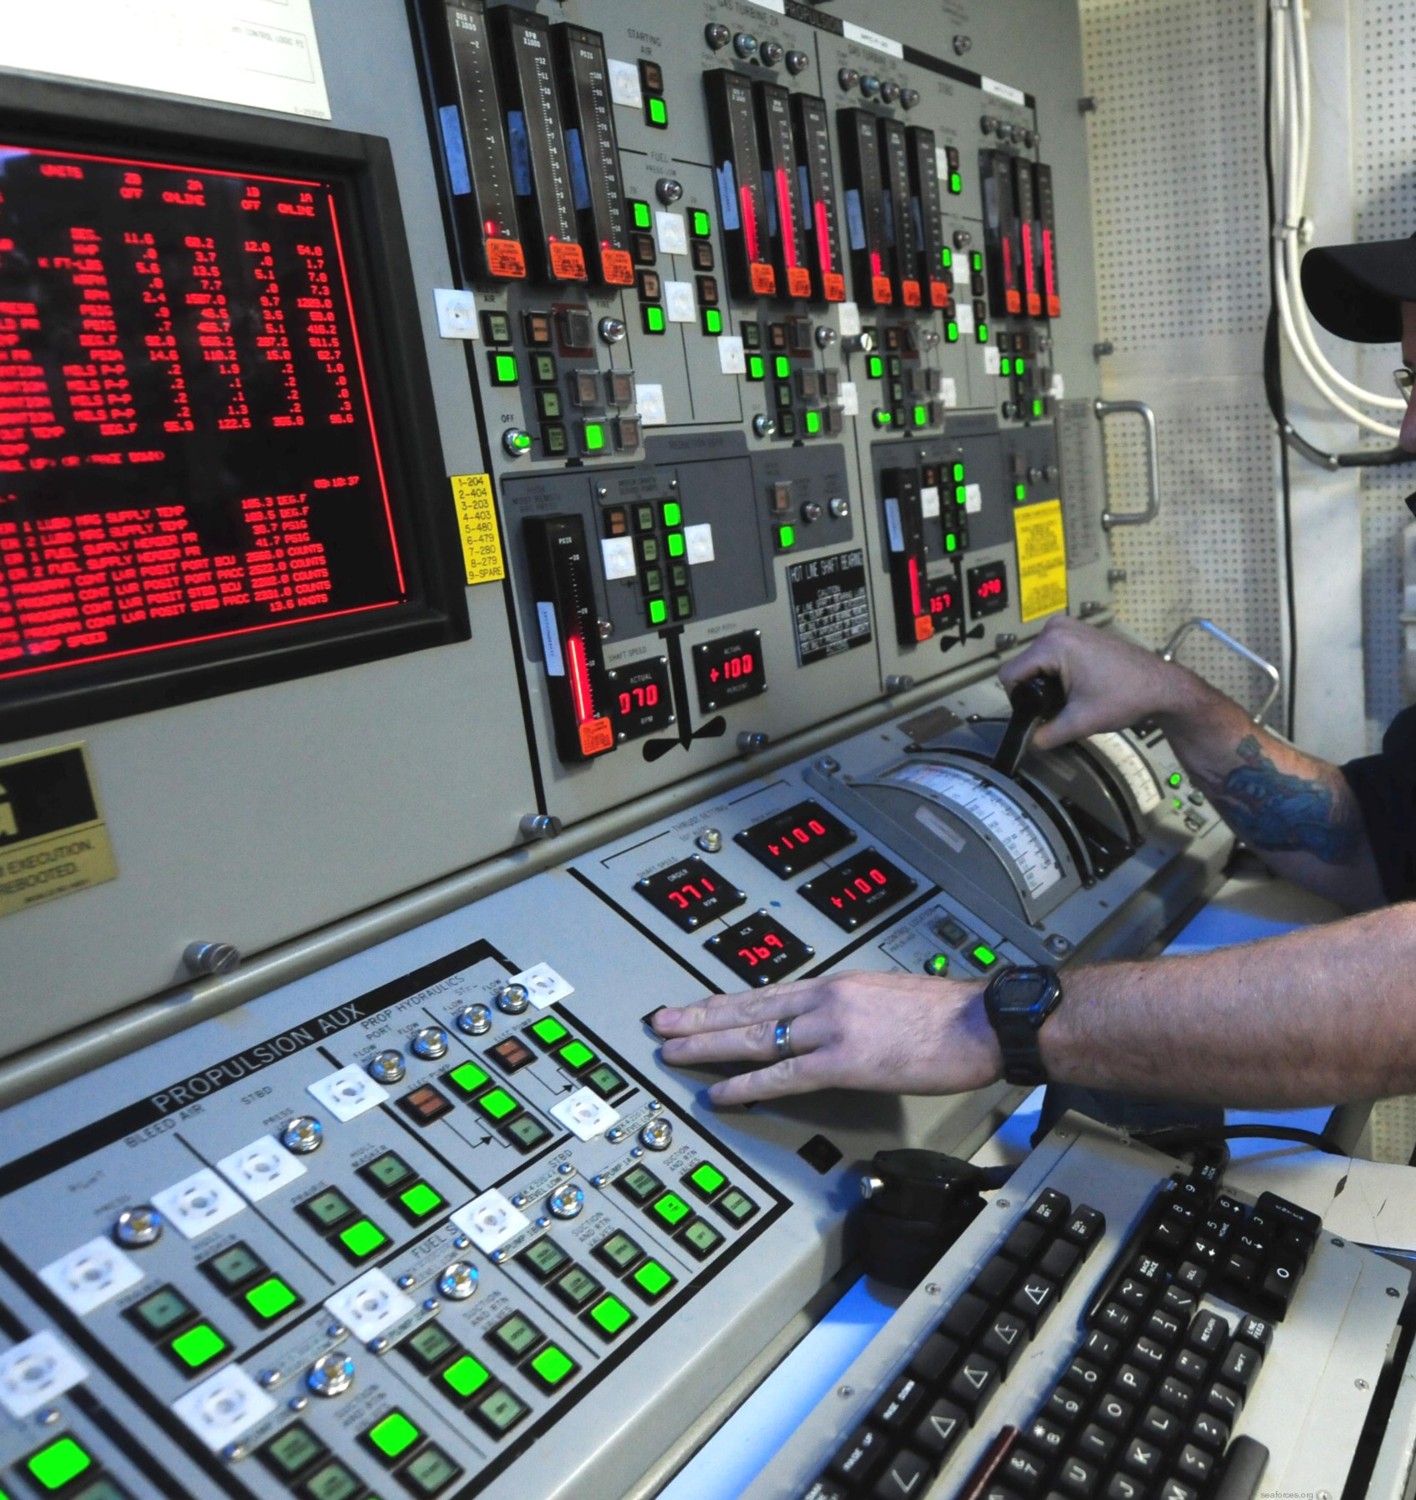 ddg-74 uss mcfaul guided missile destroyer arleigh burke class aegis bmd 30 propulsion auxilary control console